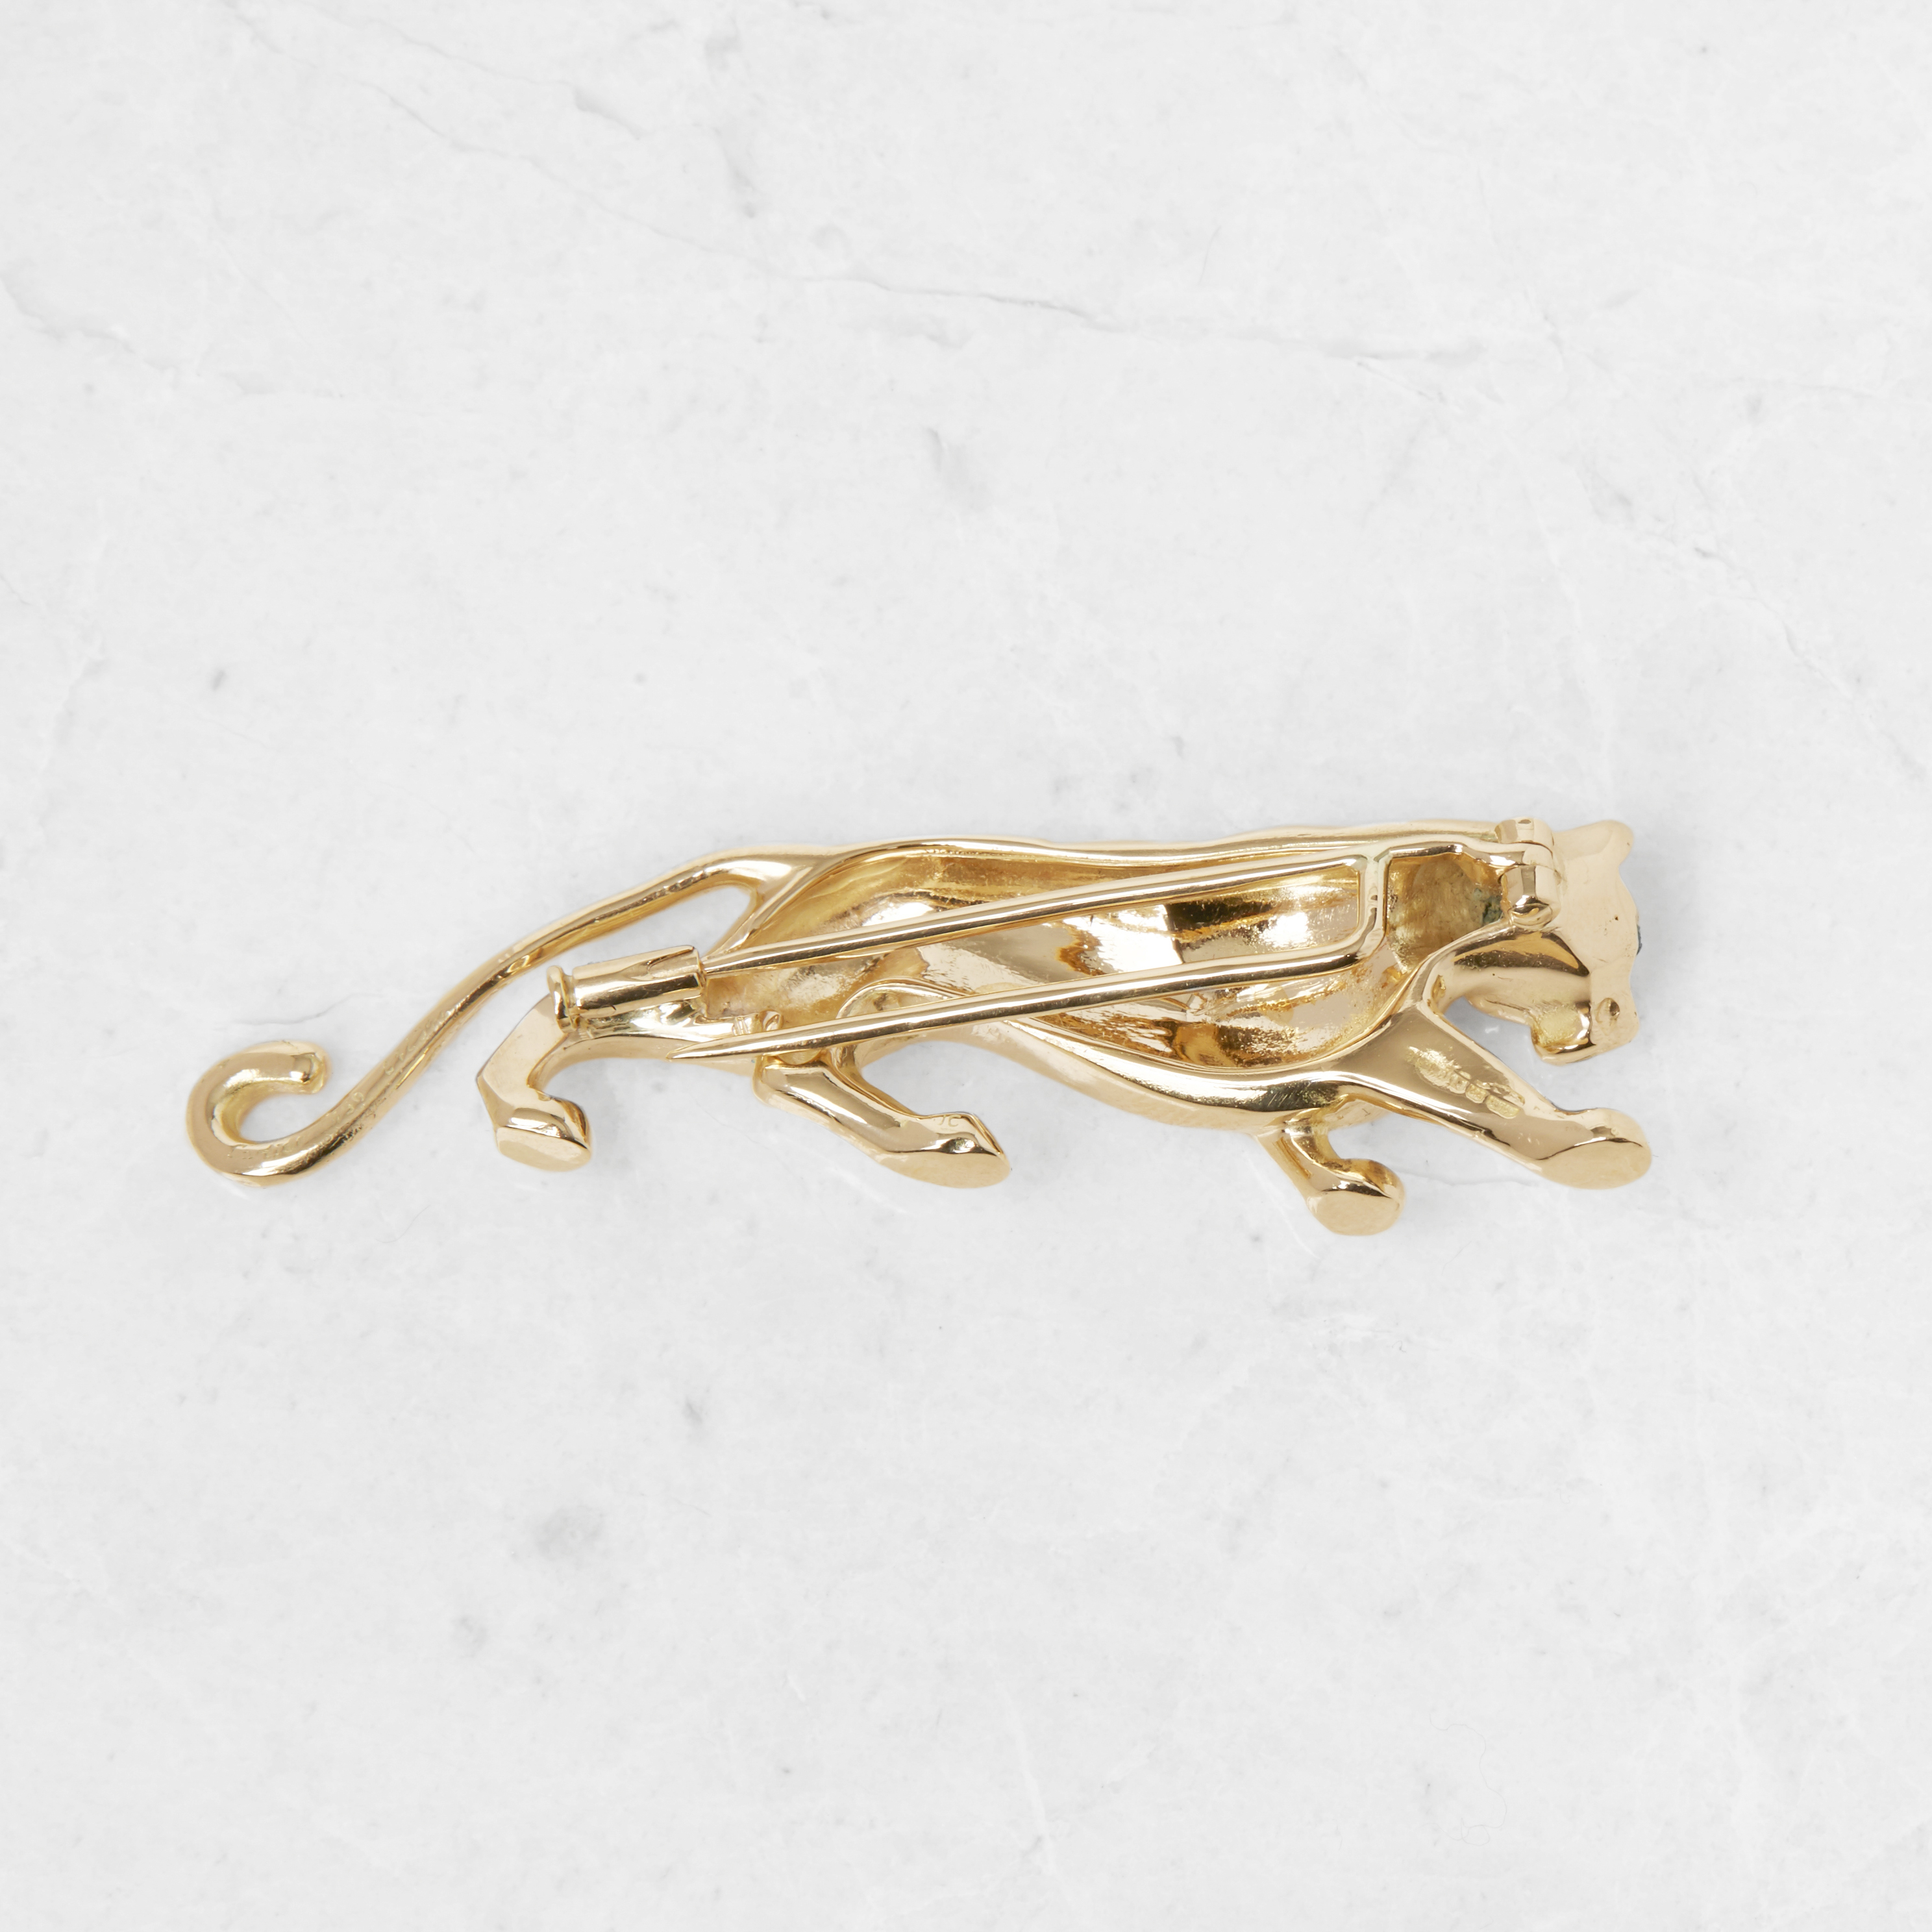 Cartier, 18k Yellow Gold Panthère Brooch - Image 2 of 9